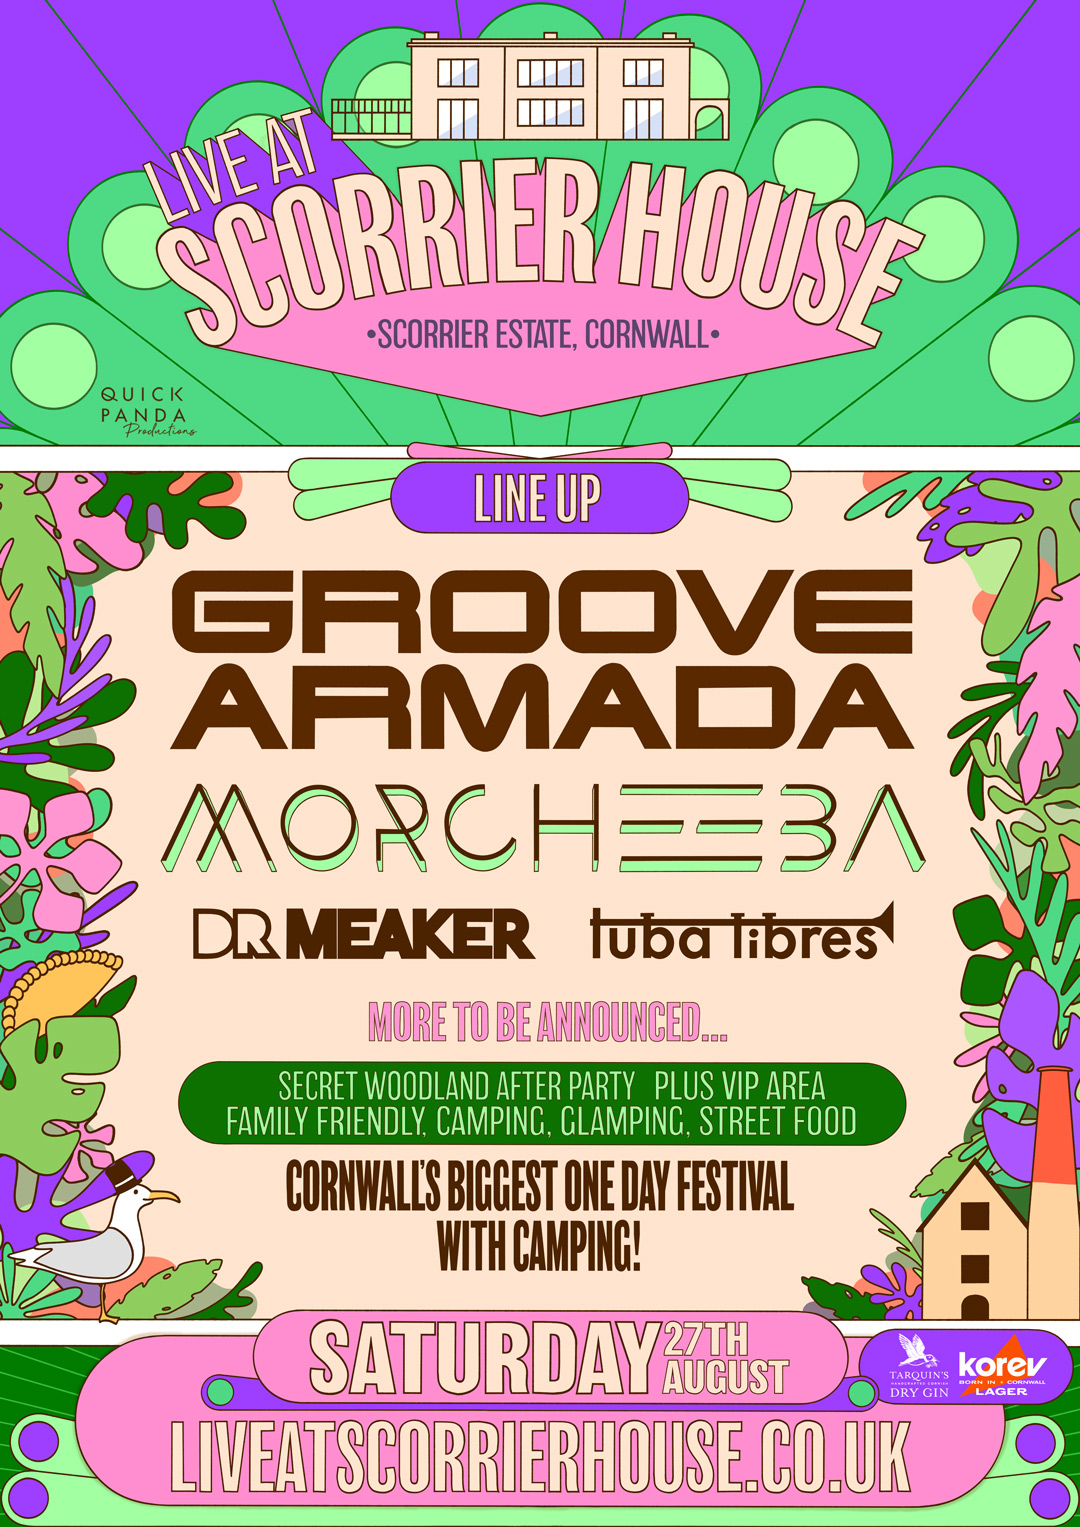 NEWS: Live at Scorrier House, Cornwall